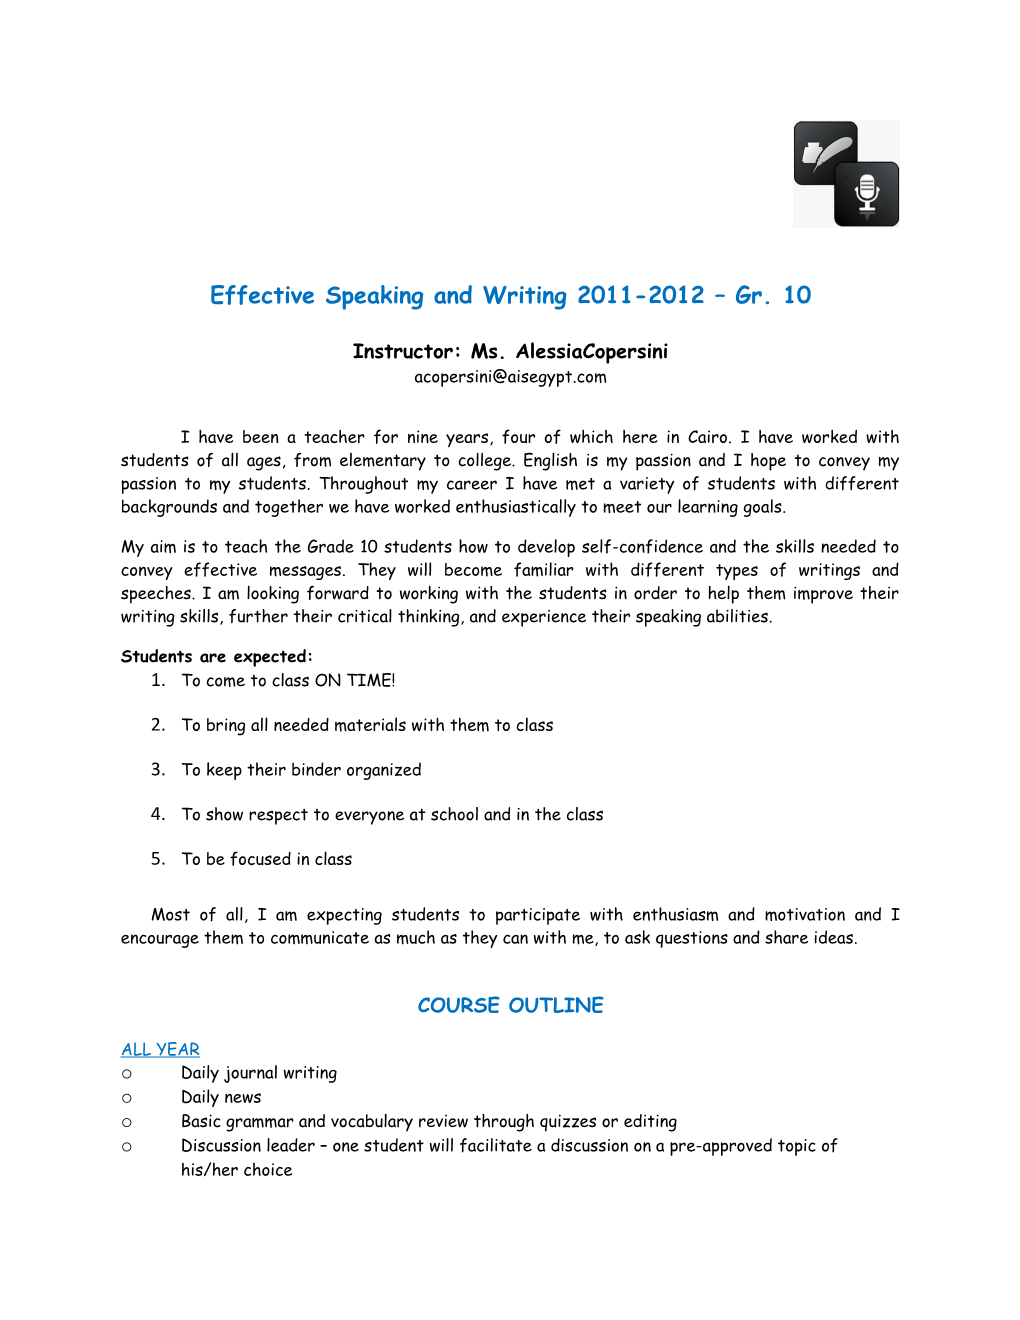 Effective Speaking and Writing 2011-2012 Gr. 10